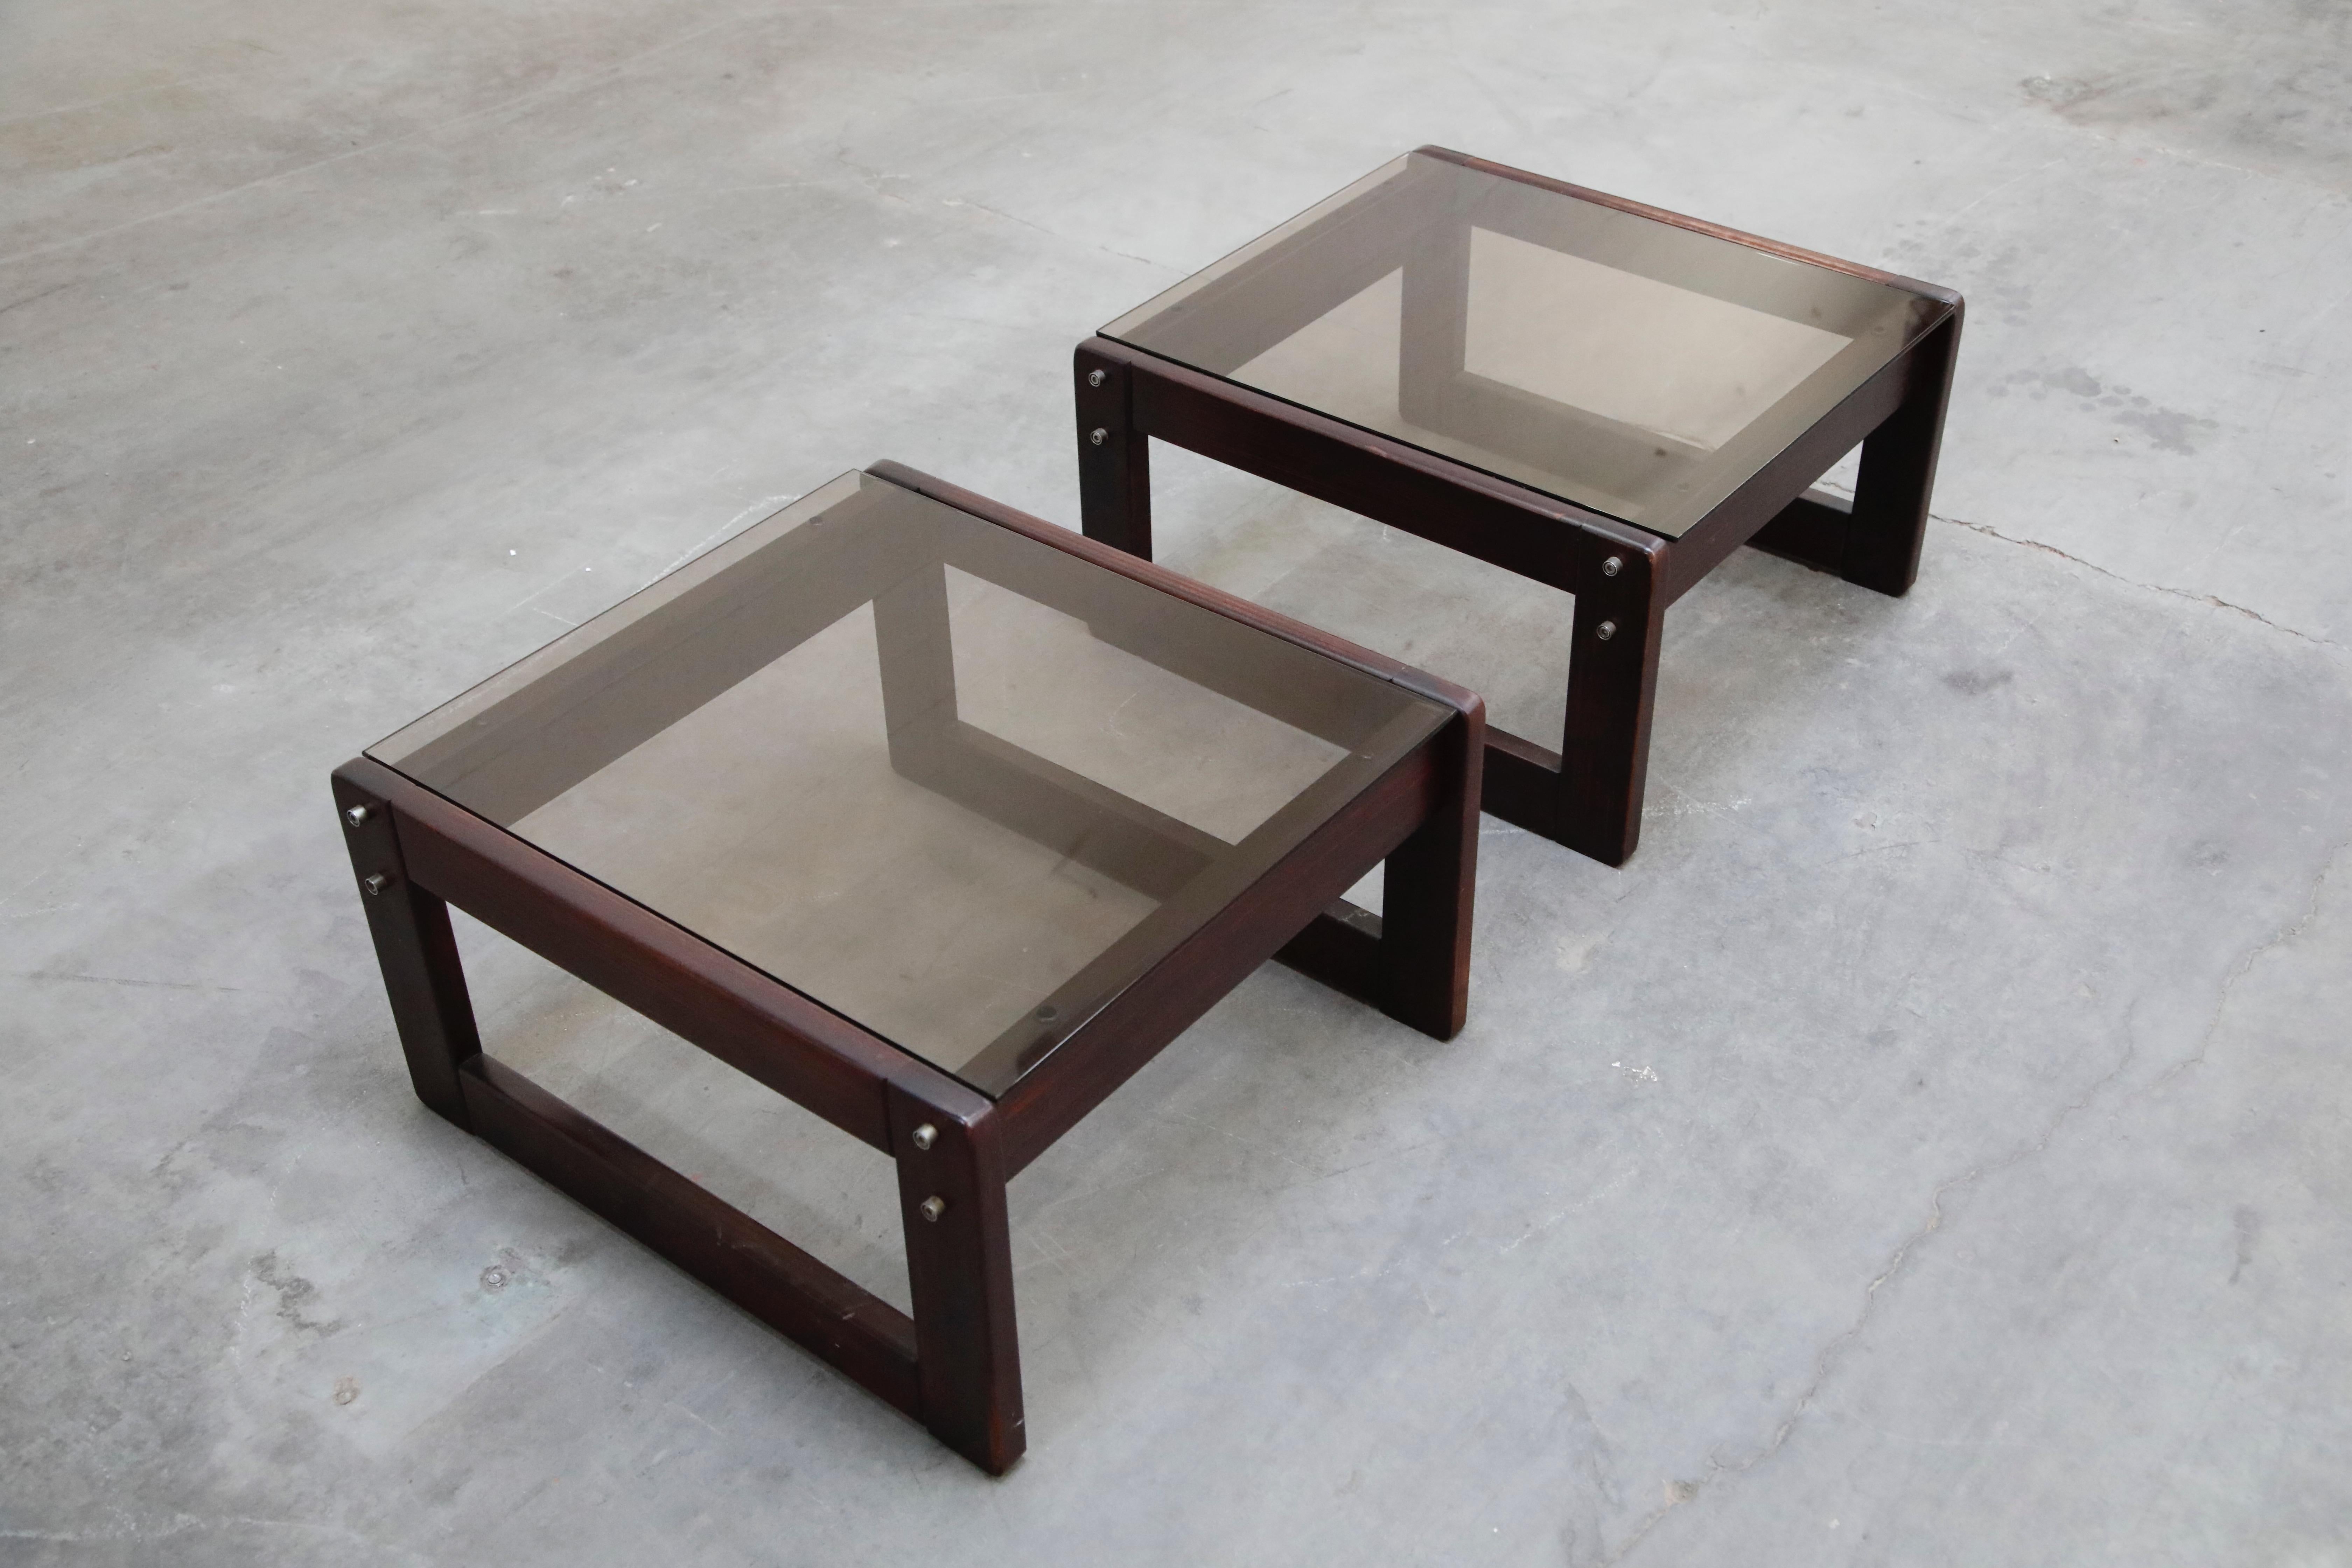 Brazilian Rosewood and Smoked Glass Side Tables by Percival Lafer, 1960s Brazil  3